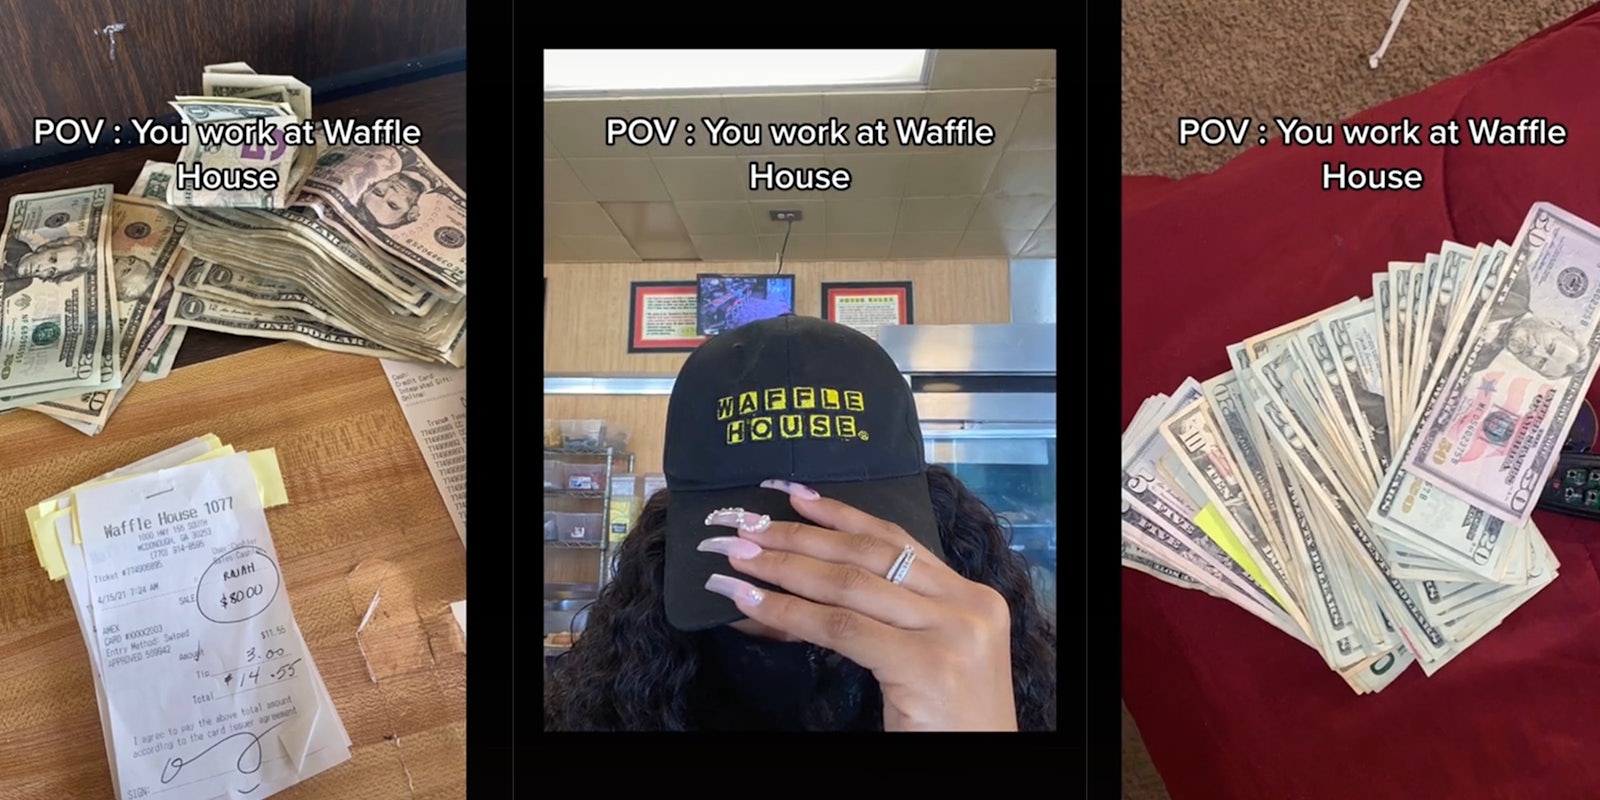 Money on table with receipt (l) woman in Waffle House hat (c) money in a pile (r) all with caption 'POV: You work at Waffle House'